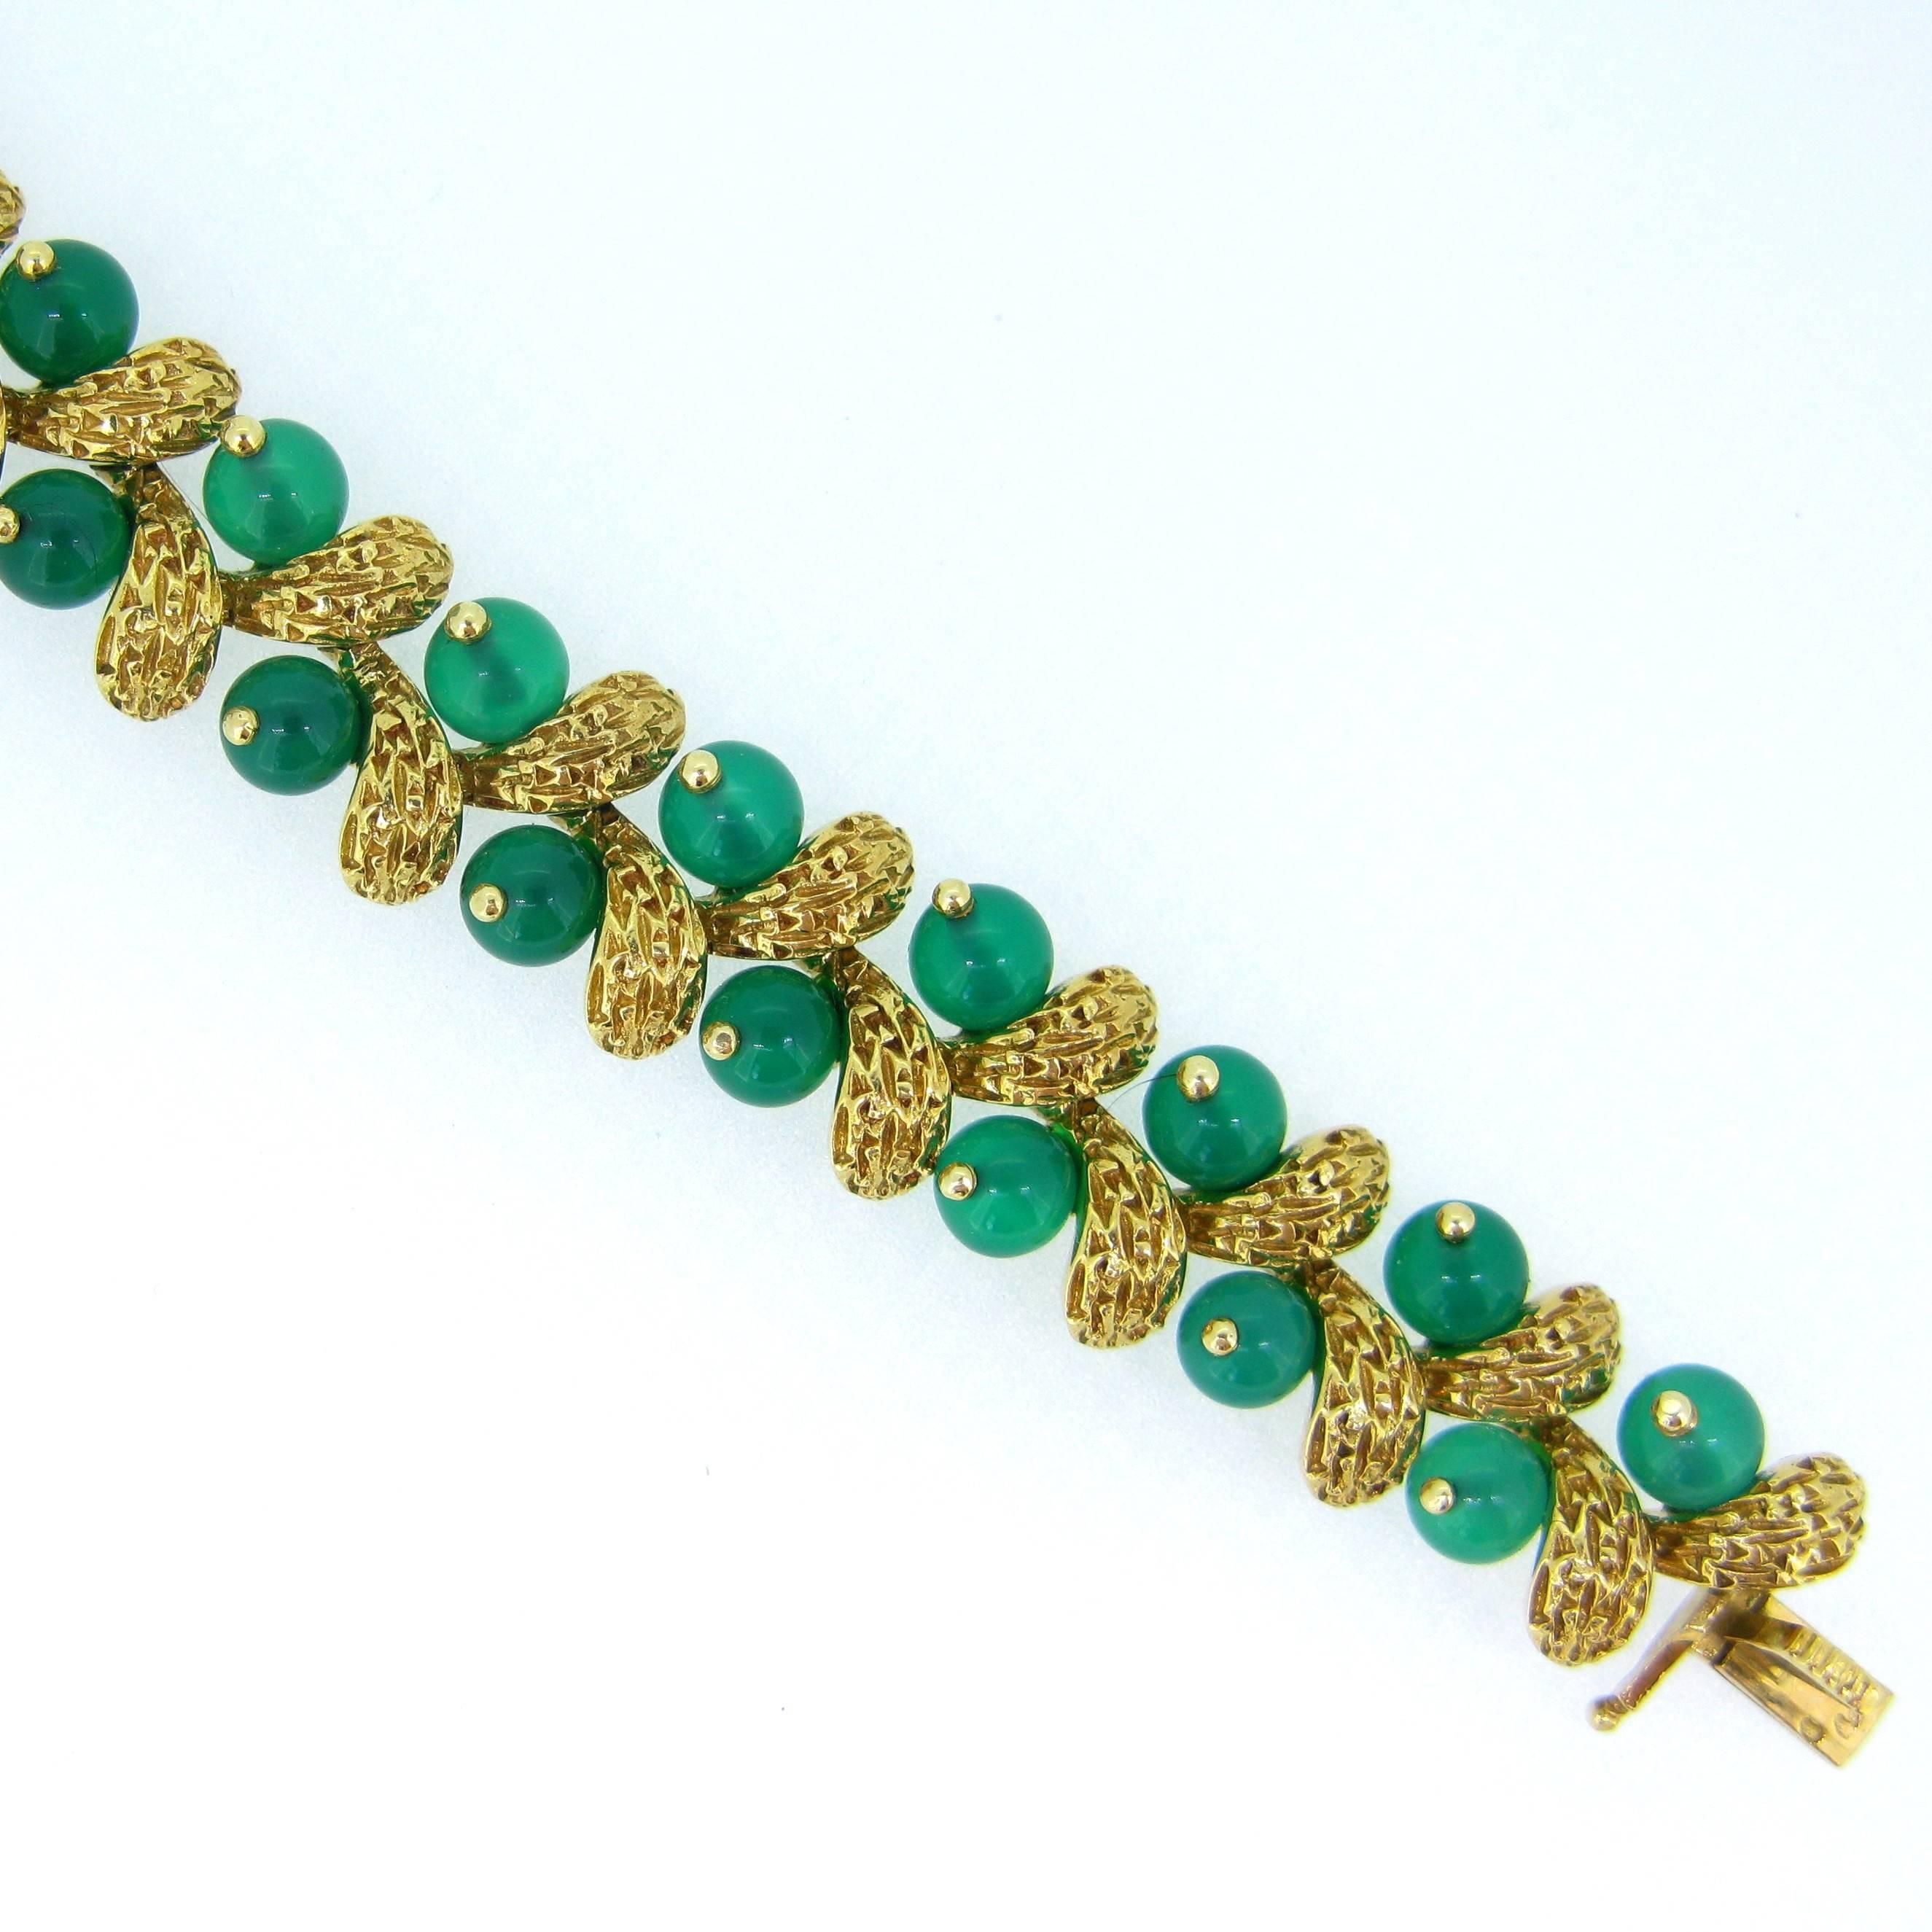 This stunning Van Cleef and Arpels bracelet is made in 18kt Yellow Gold and is adorned with 32 Chrysoprase beads. It features a textured leaf design. It is signed on the clasp with VCA 750 and is numbered 119228.

Weight:	49gr

Metal:	18kt Yellow